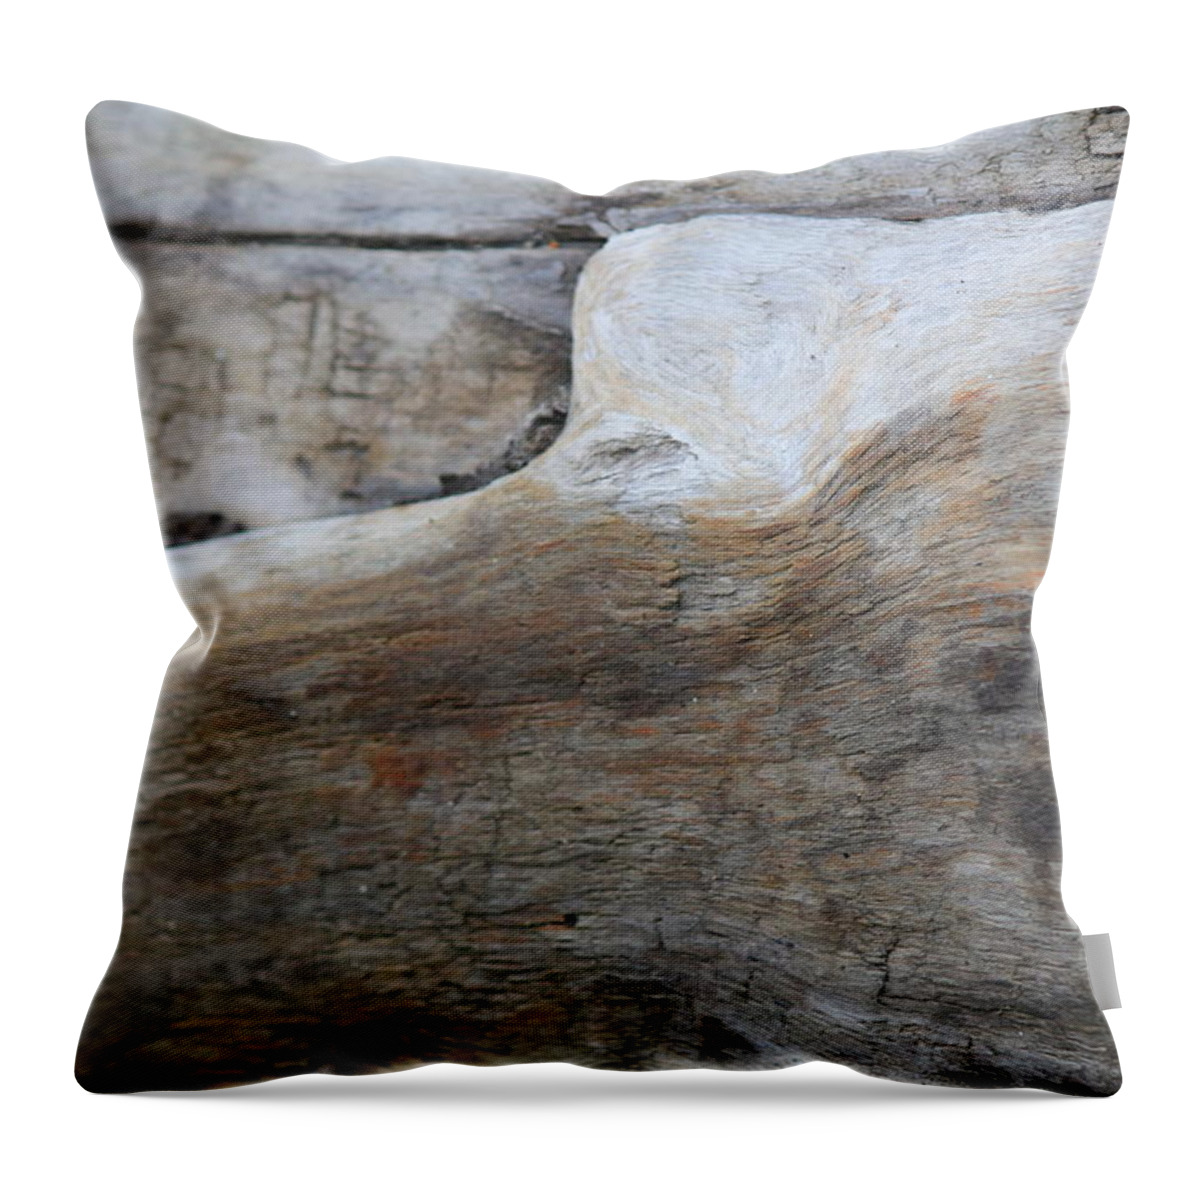 Tidal Throw Pillow featuring the photograph Tidal Wood - 1492 by Annekathrin Hansen